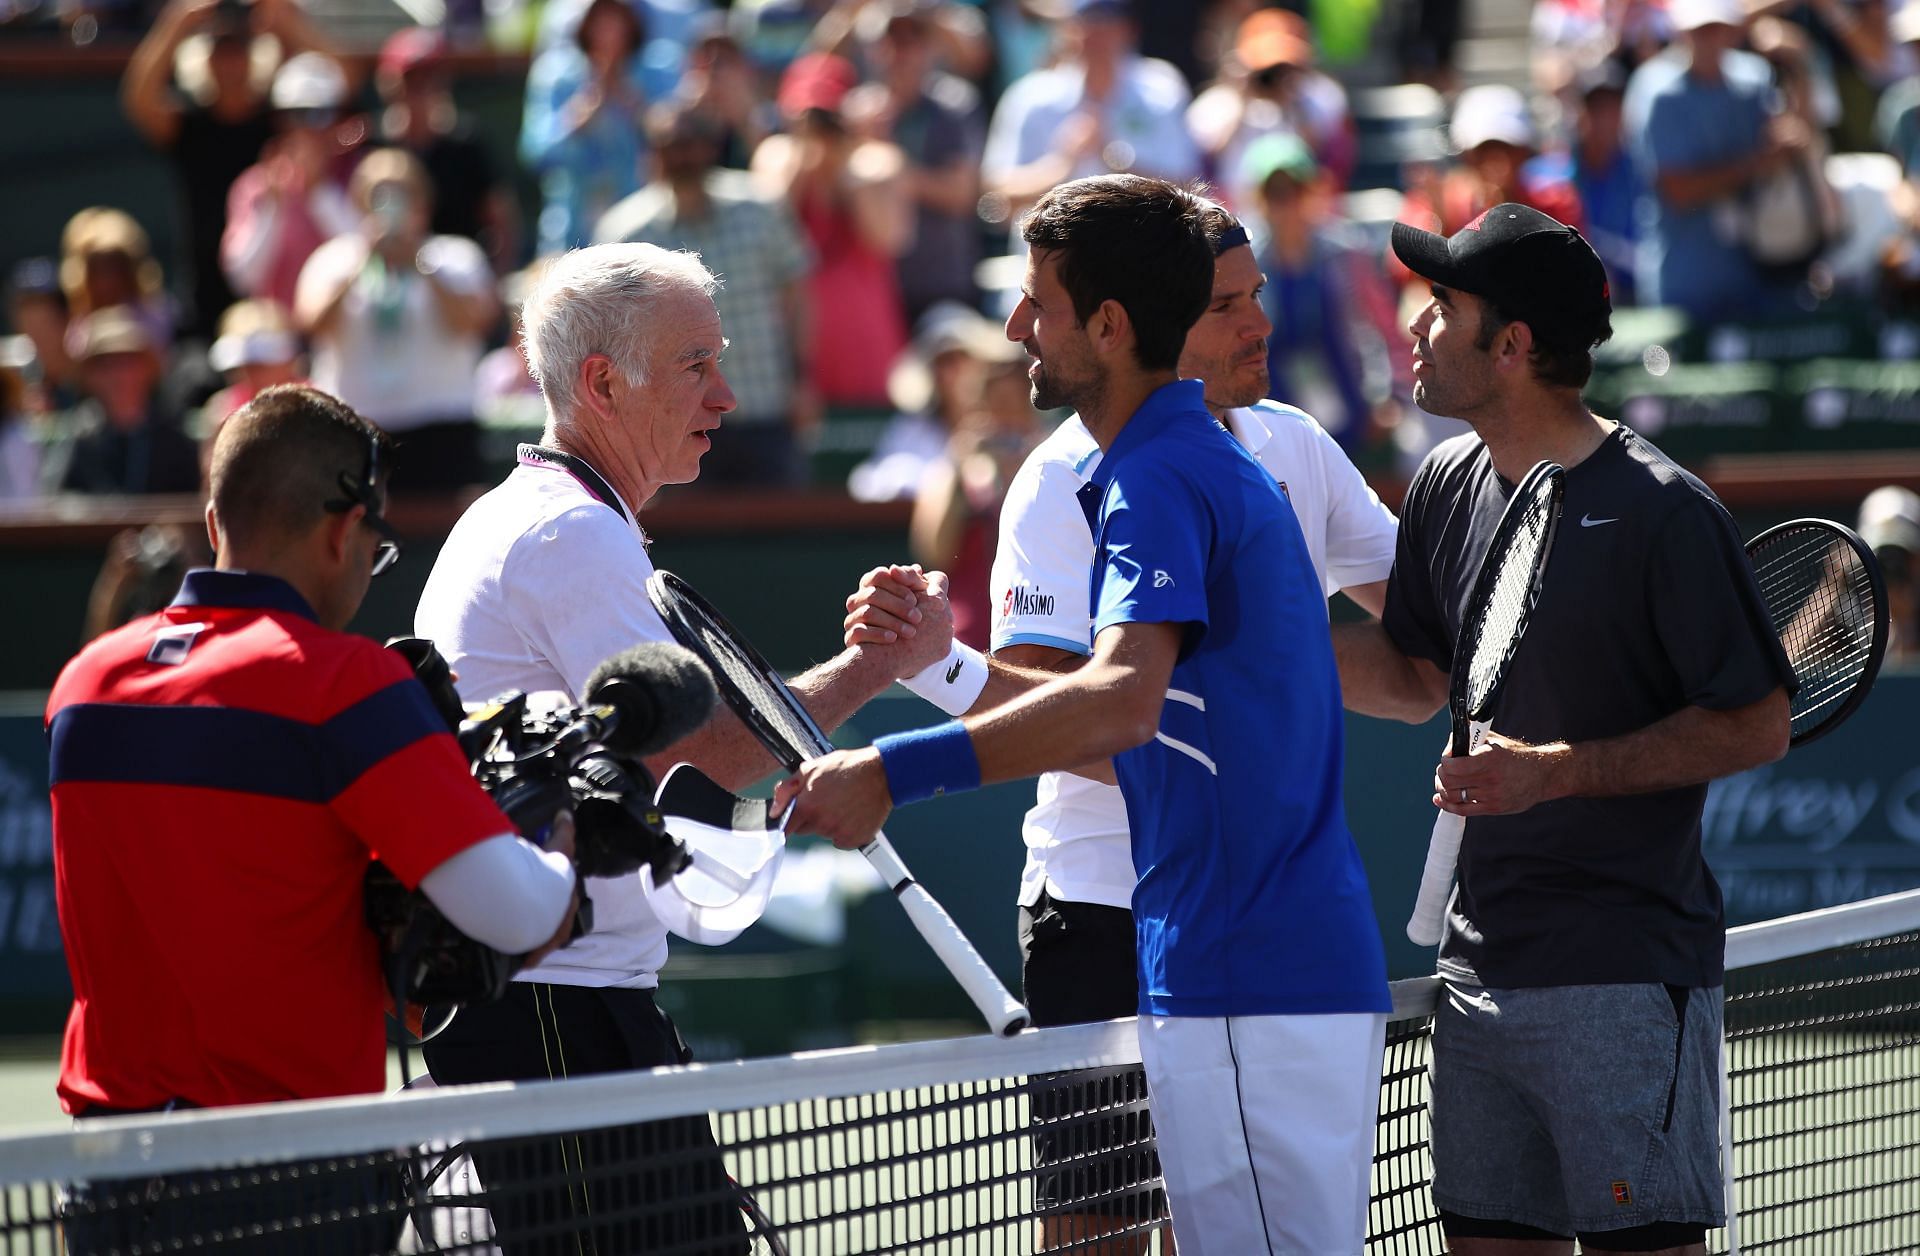 John McEnroe (in white) shakes hands with Novak Djokovic (in blue) in an exhibition match at the 2023 Indian Wells.